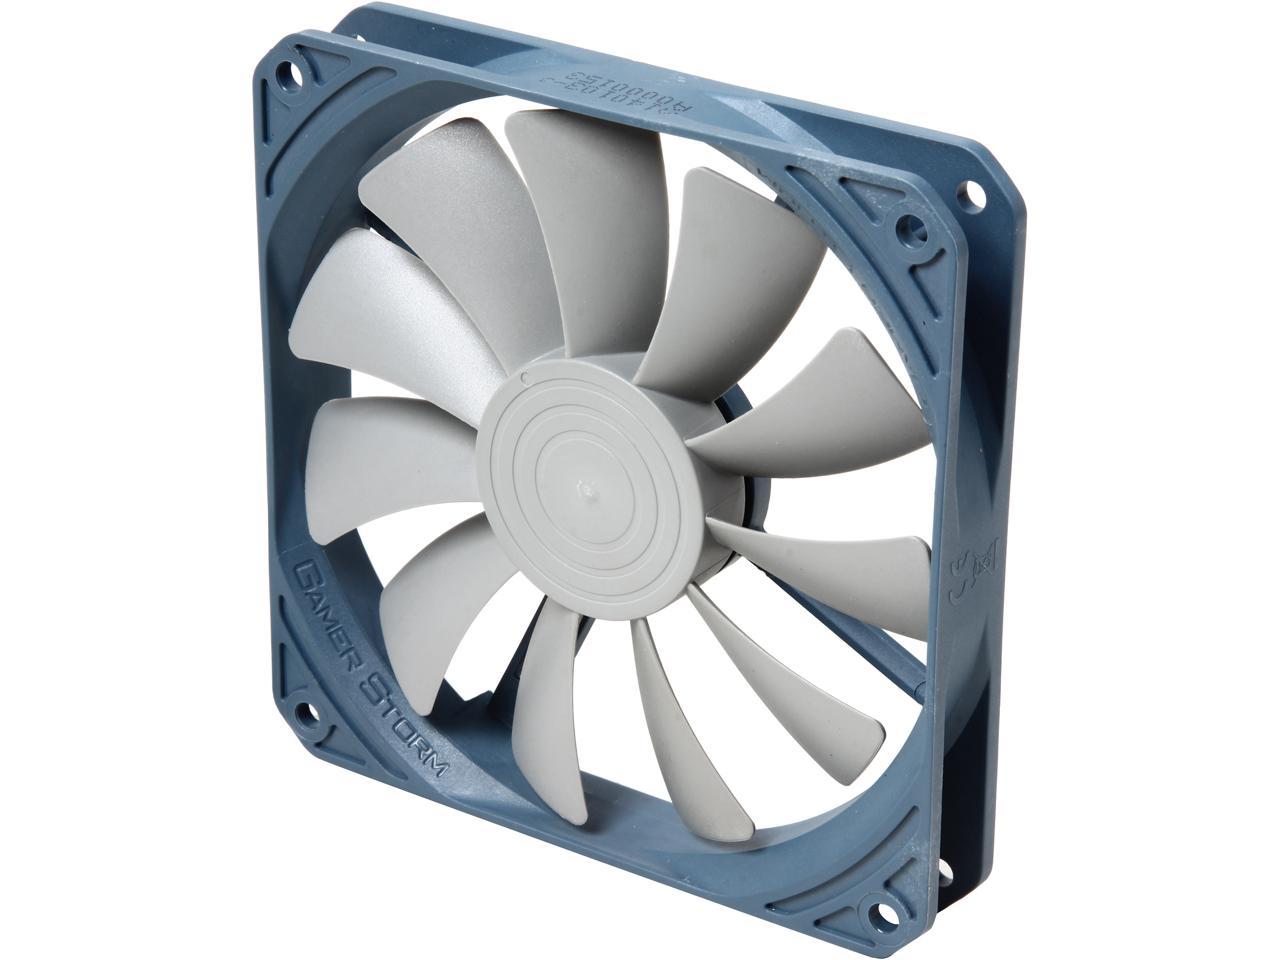 DEEPCOOL Gamer Storm GS 120 PWM Fan Hydro Bearing 120X120X20mm Slim design for Small Cases